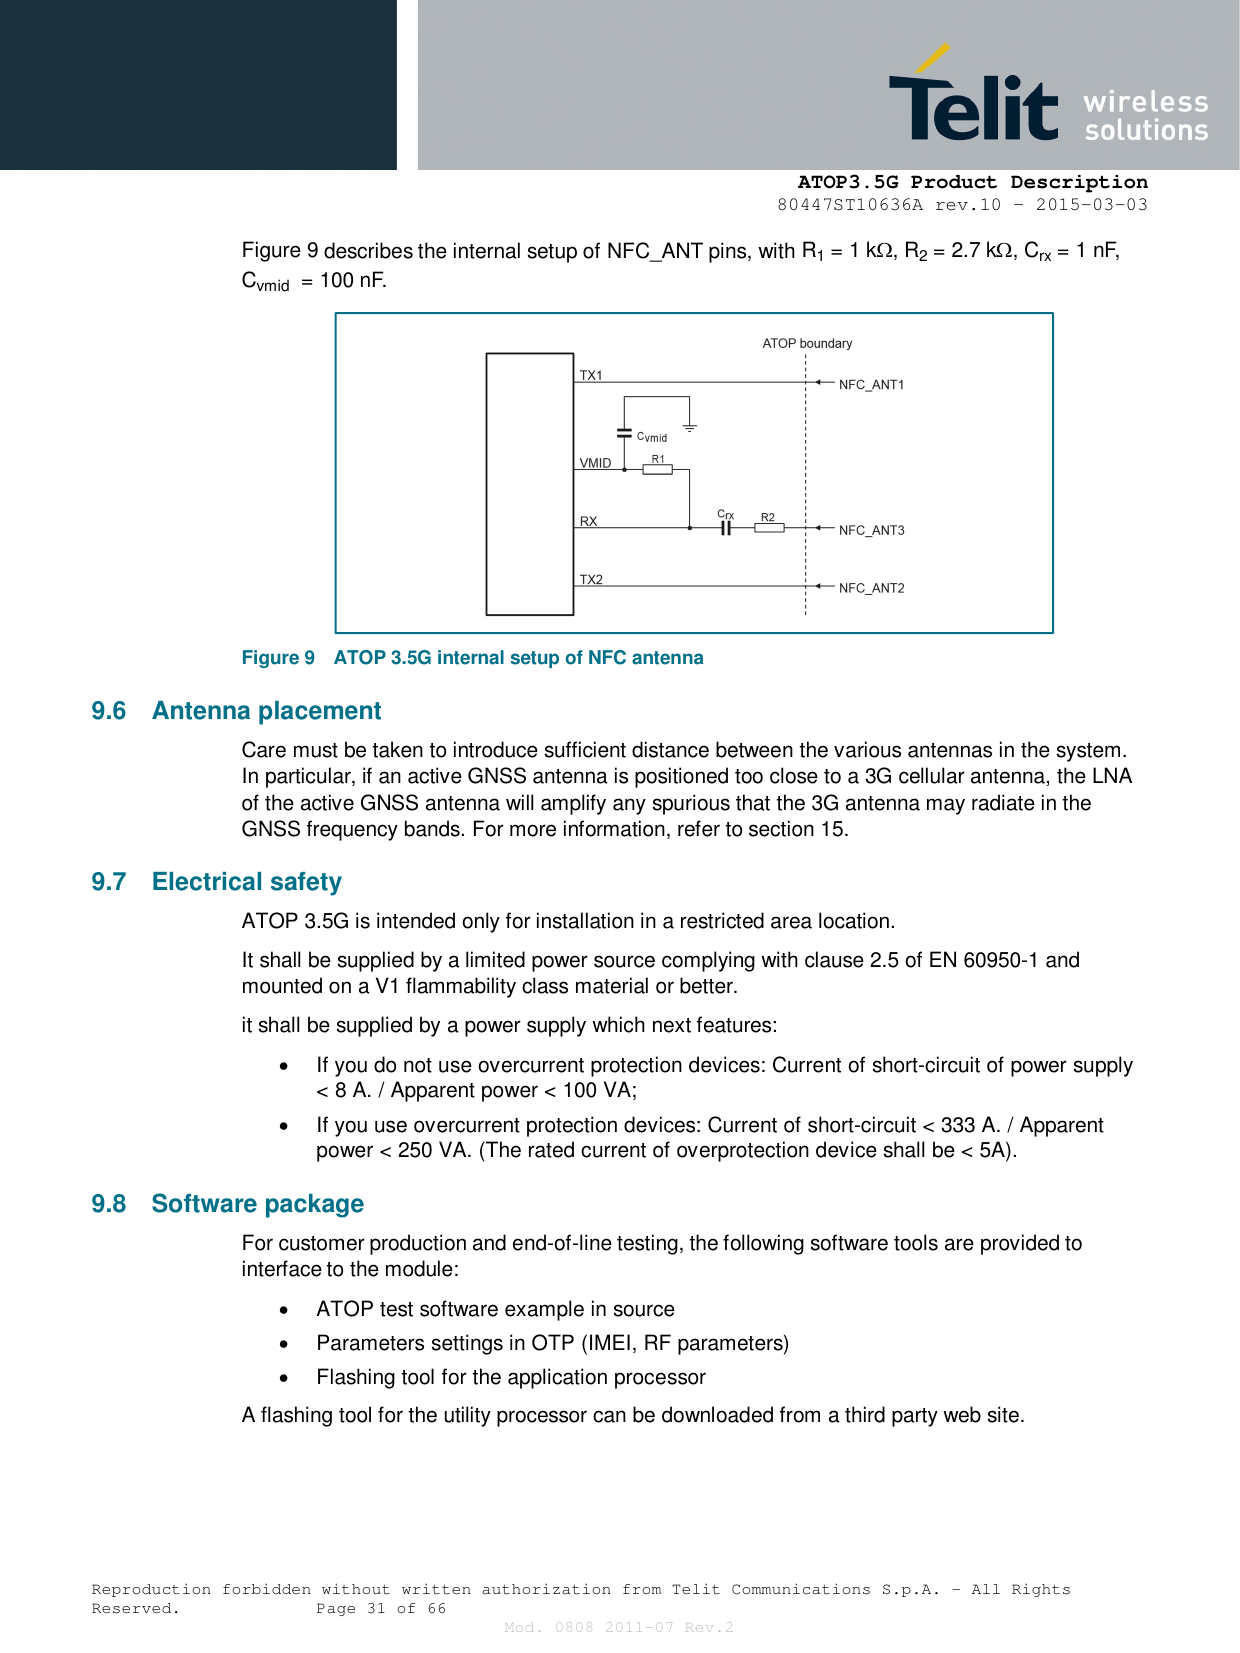      ATOP3.5G Product Description   80447ST10636A rev.10 – 2015-03-03  Reproduction forbidden without written authorization from Telit Communications S.p.A. - All Rights Reserved.    Page 31 of 66 Mod. 0808 2011-07 Rev.2 Figure 9 describes the internal setup of NFC_ANT pins, with R1 = 1 k, R2 = 2.7 k, Crx = 1 nF, Cvmid   = 100 nF. Figure 9  ATOP 3.5G internal setup of NFC antenna 9.6  Antenna placement Care must be taken to introduce sufficient distance between the various antennas in the system. In particular, if an active GNSS antenna is positioned too close to a 3G cellular antenna, the LNA of the active GNSS antenna will amplify any spurious that the 3G antenna may radiate in the GNSS frequency bands. For more information, refer to section 15. 9.7  Electrical safety ATOP 3.5G is intended only for installation in a restricted area location. It shall be supplied by a limited power source complying with clause 2.5 of EN 60950-1 and mounted on a V1 flammability class material or better. it shall be supplied by a power supply which next features:   If you do not use overcurrent protection devices: Current of short-circuit of power supply &lt; 8 A. / Apparent power &lt; 100 VA;   If you use overcurrent protection devices: Current of short-circuit &lt; 333 A. / Apparent power &lt; 250 VA. (The rated current of overprotection device shall be &lt; 5A). 9.8  Software package For customer production and end-of-line testing, the following software tools are provided to interface to the module:   ATOP test software example in source   Parameters settings in OTP (IMEI, RF parameters)   Flashing tool for the application processor A flashing tool for the utility processor can be downloaded from a third party web site.   